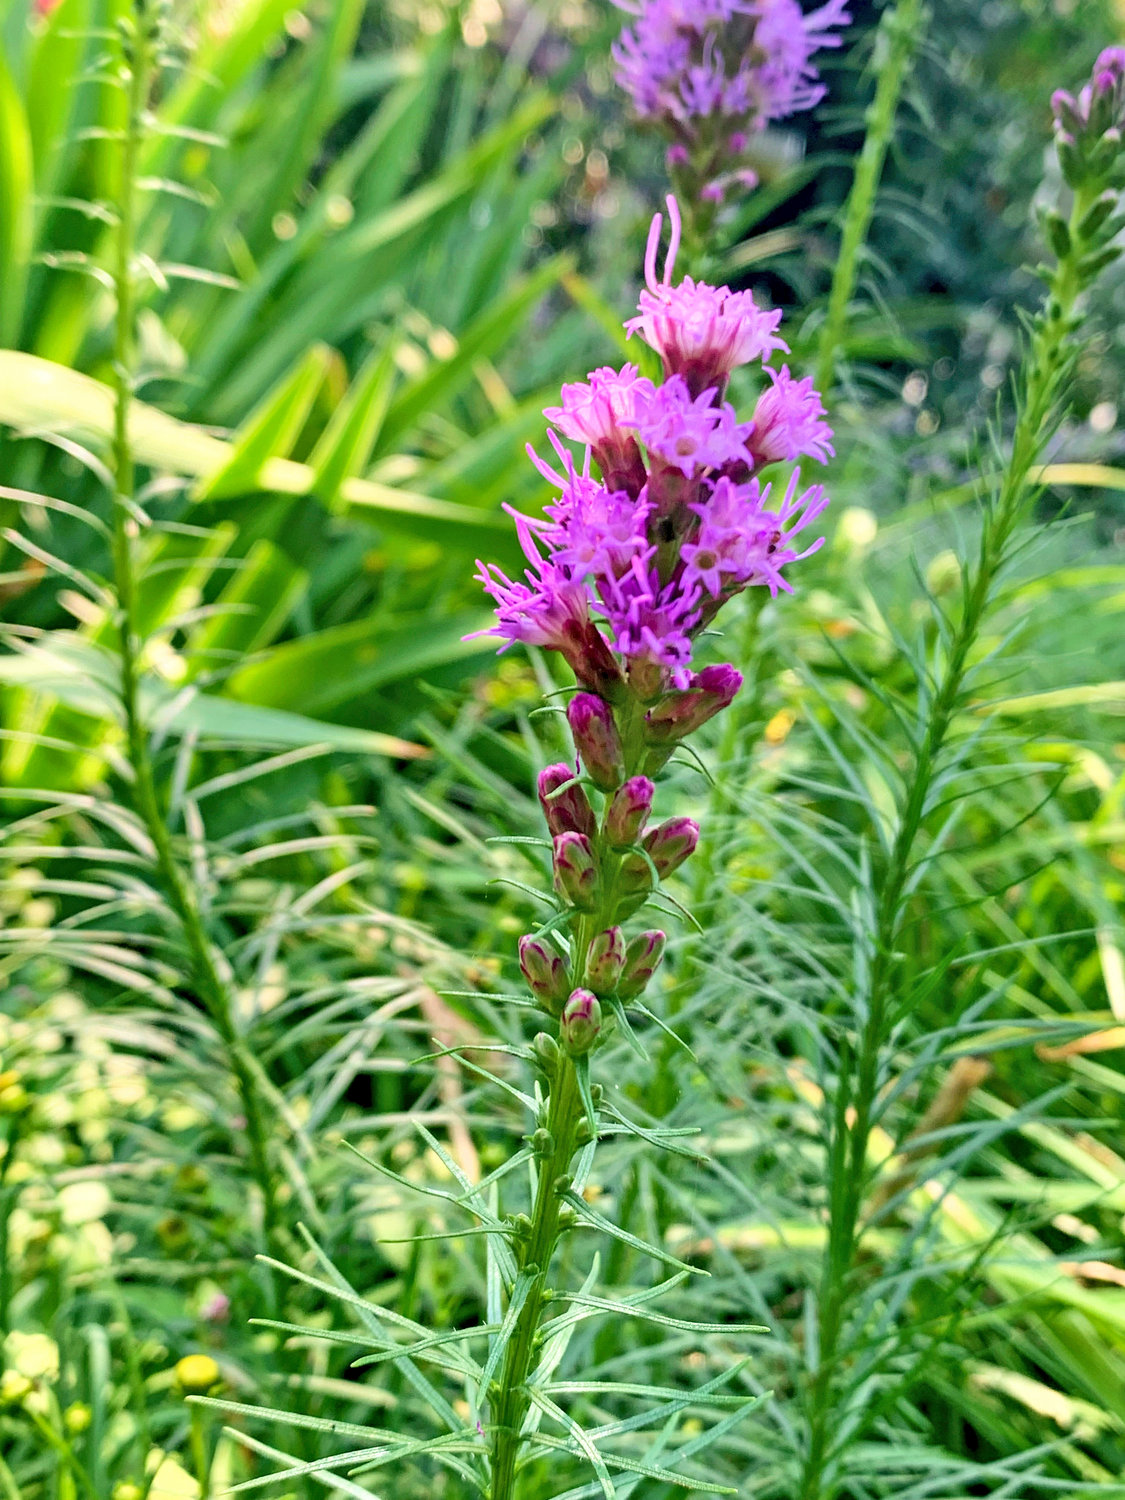 Liatris spicata growing in a garden in Long Island. The plant is known by several common names, including gayfeather and blazing star.